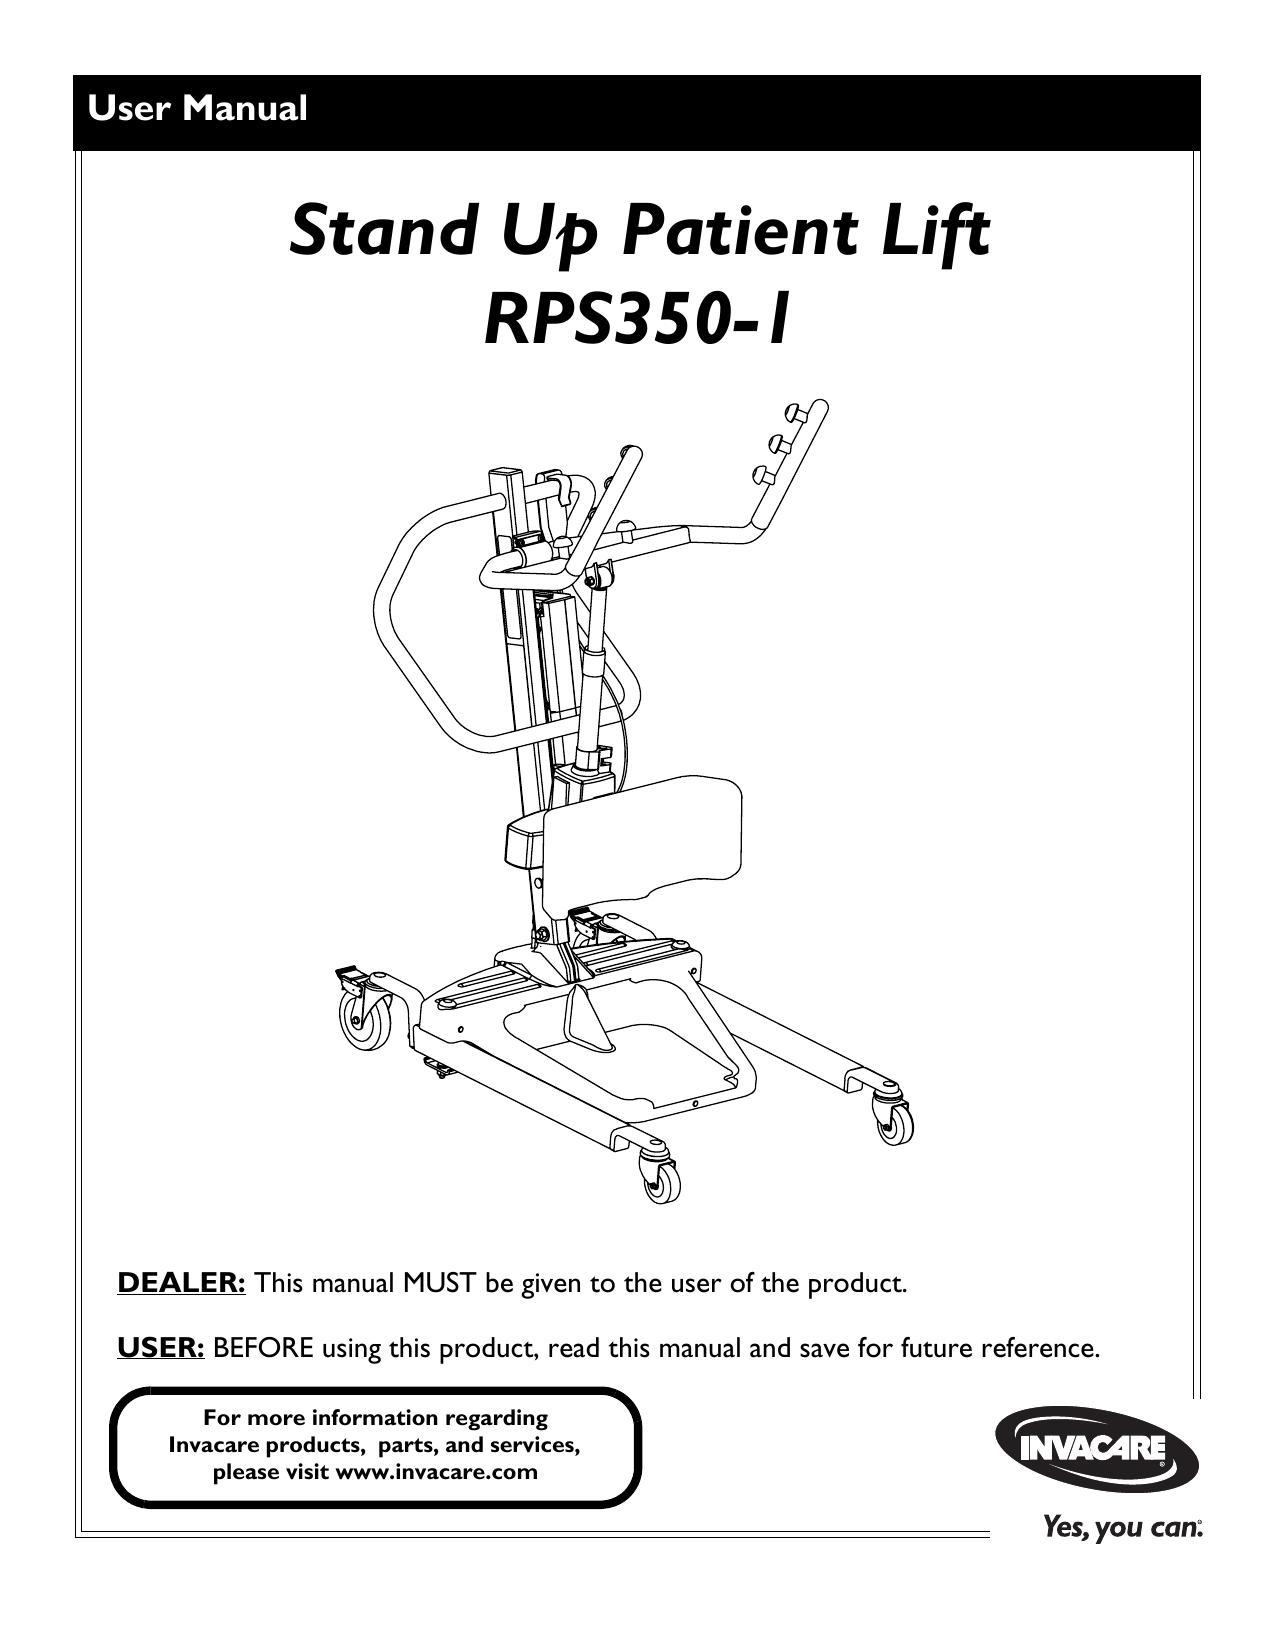 invacare-stand-up-patient-lift-rps3s0-i-user-manual.pdf